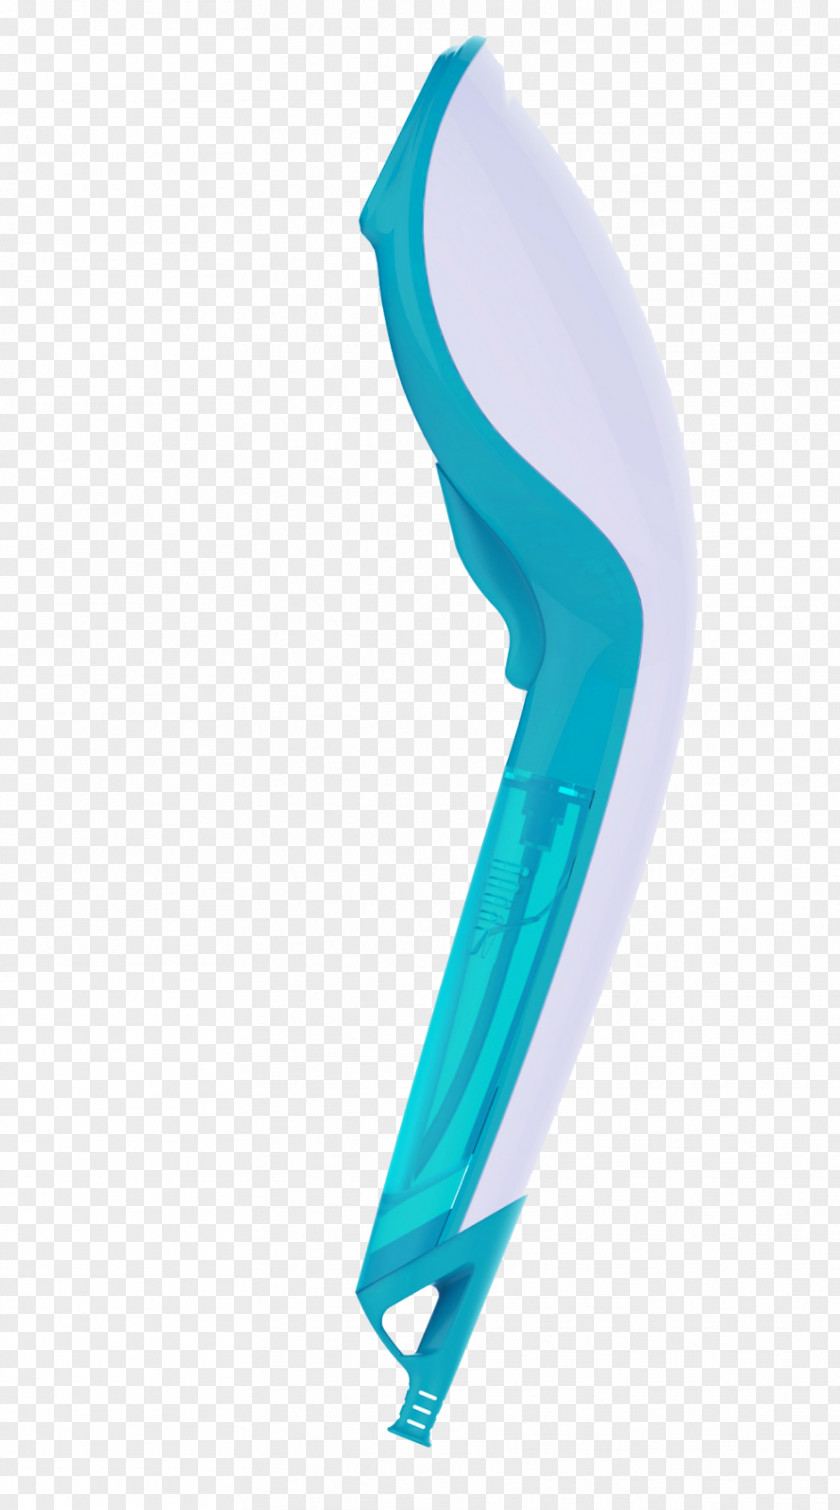 Steam Iron Product Design Turquoise Angle PNG